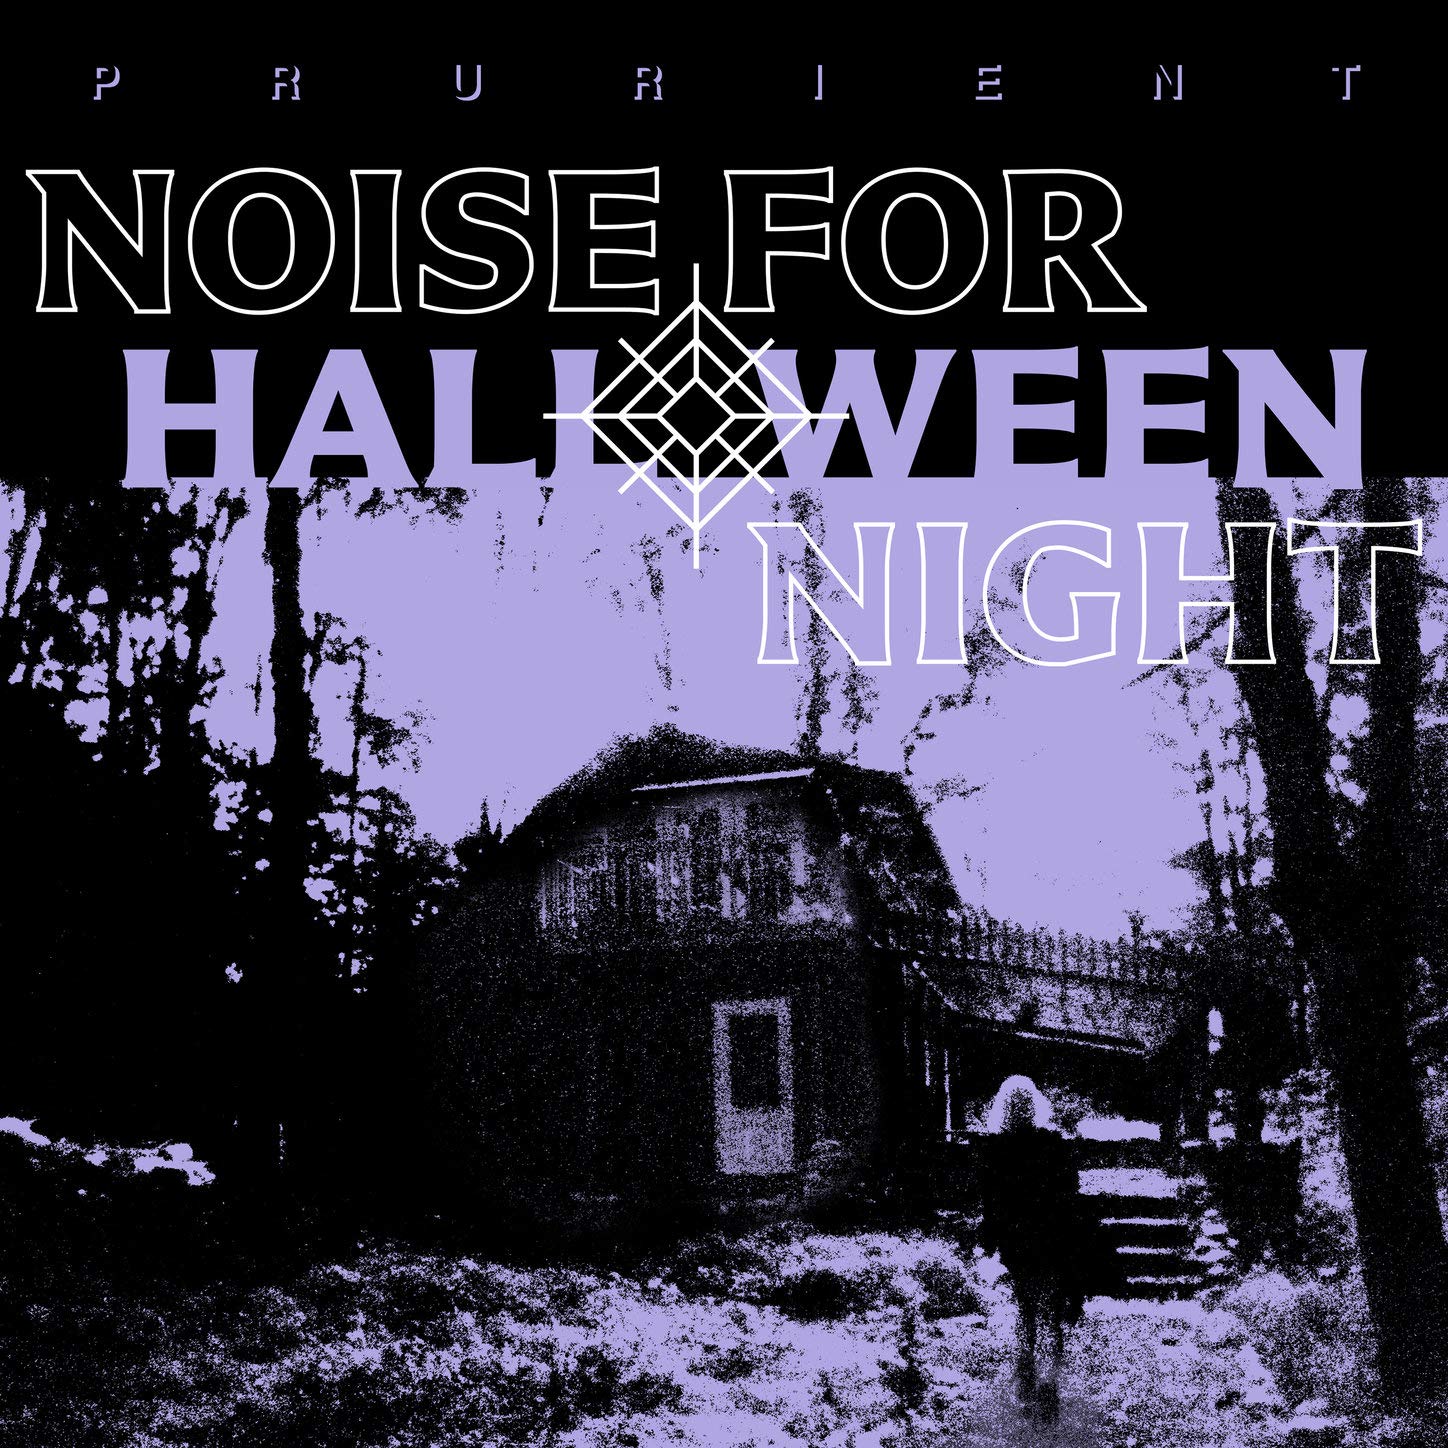 Prurient - Noise for Halloween Night (2019) [FLAC 24bit/48kHz]